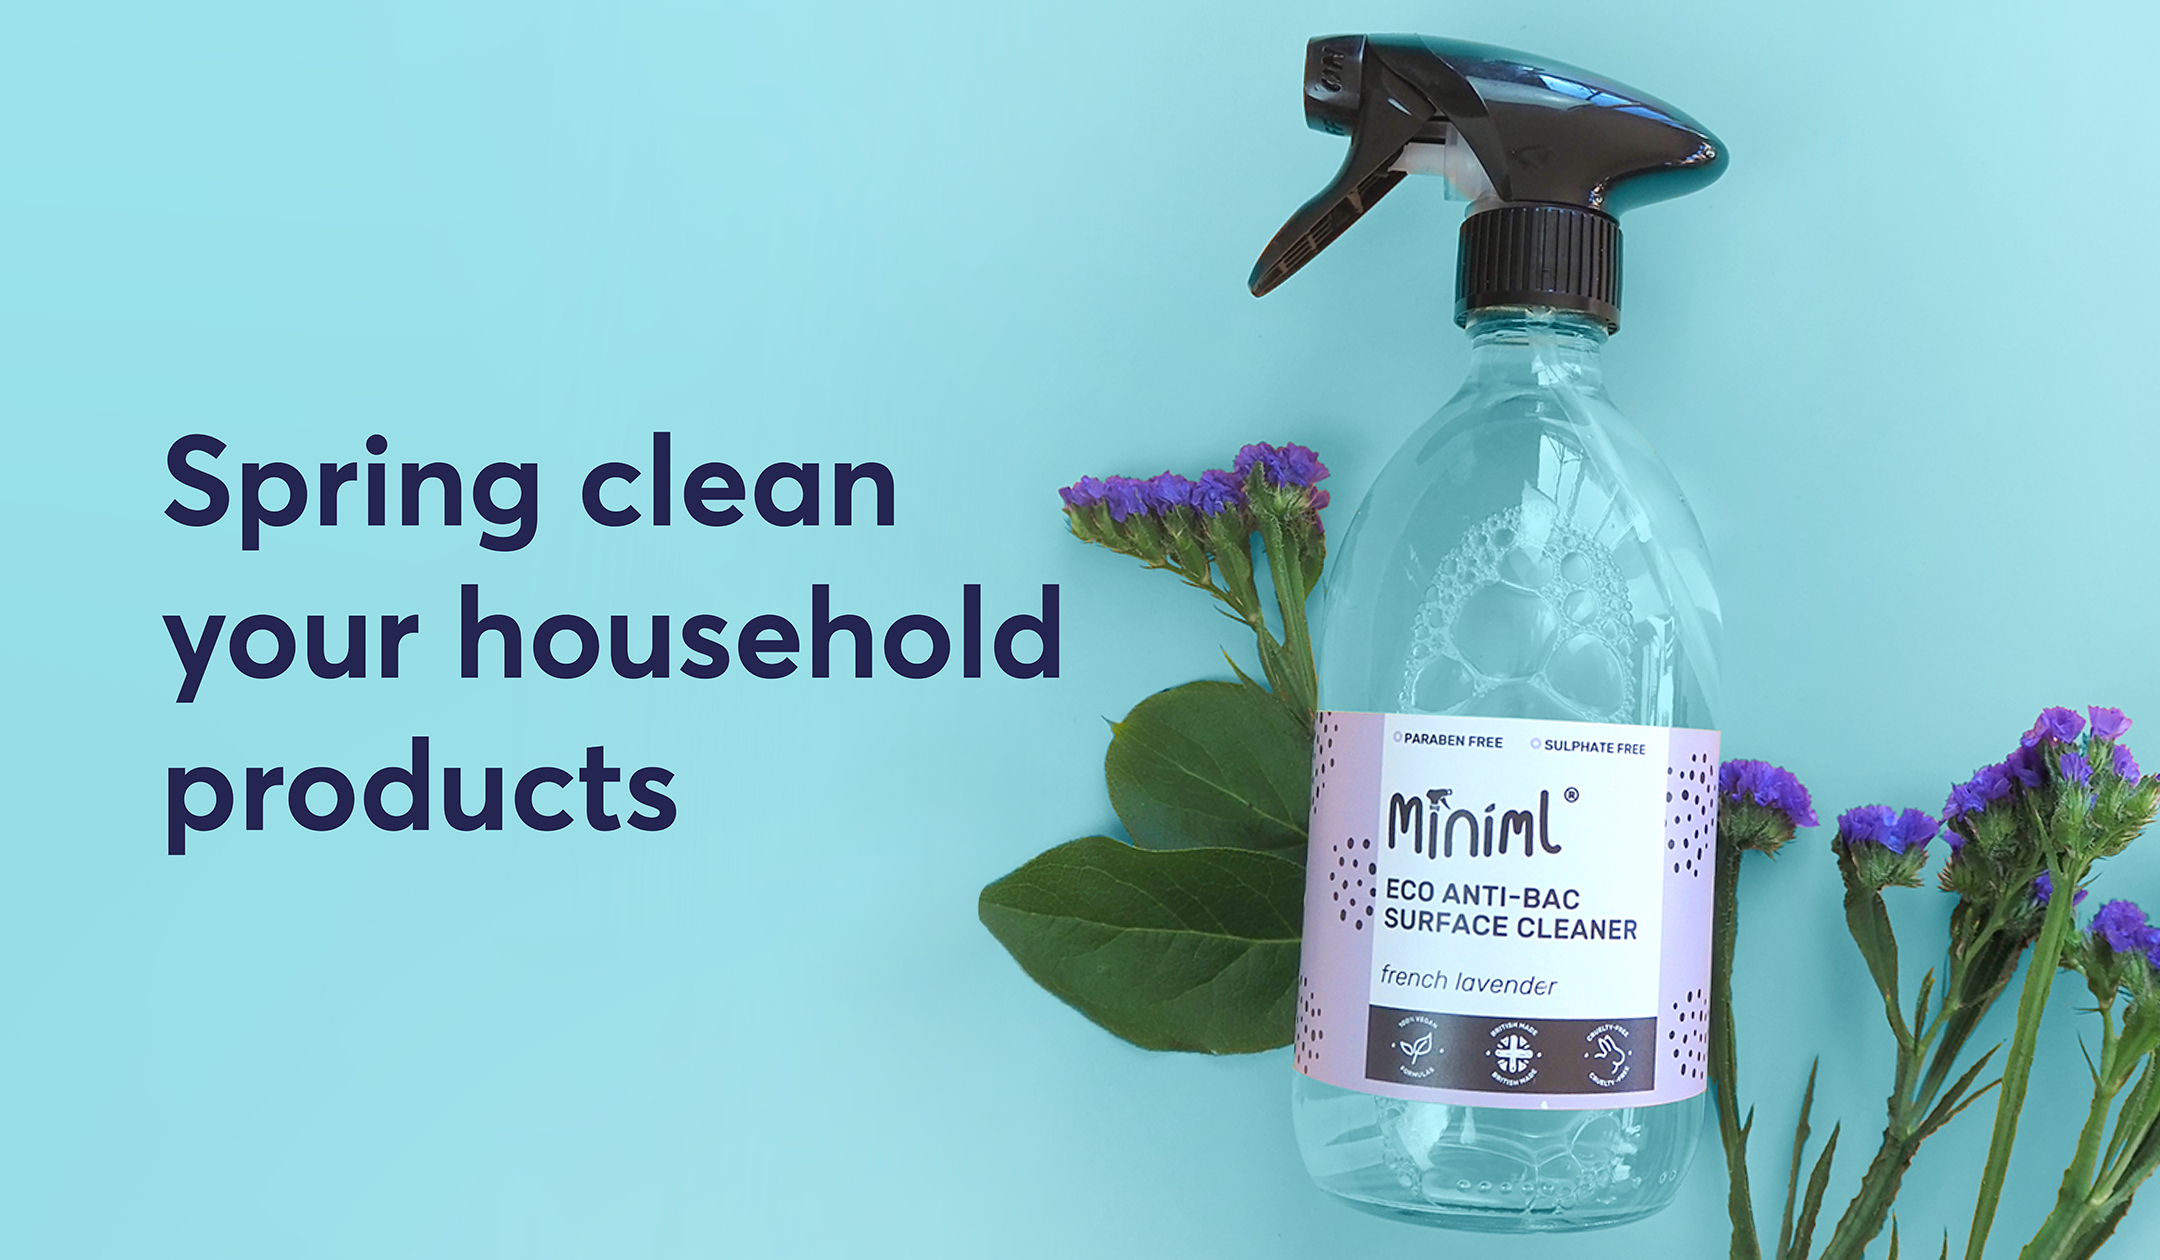 Time to ditch the chemicals under your sink?